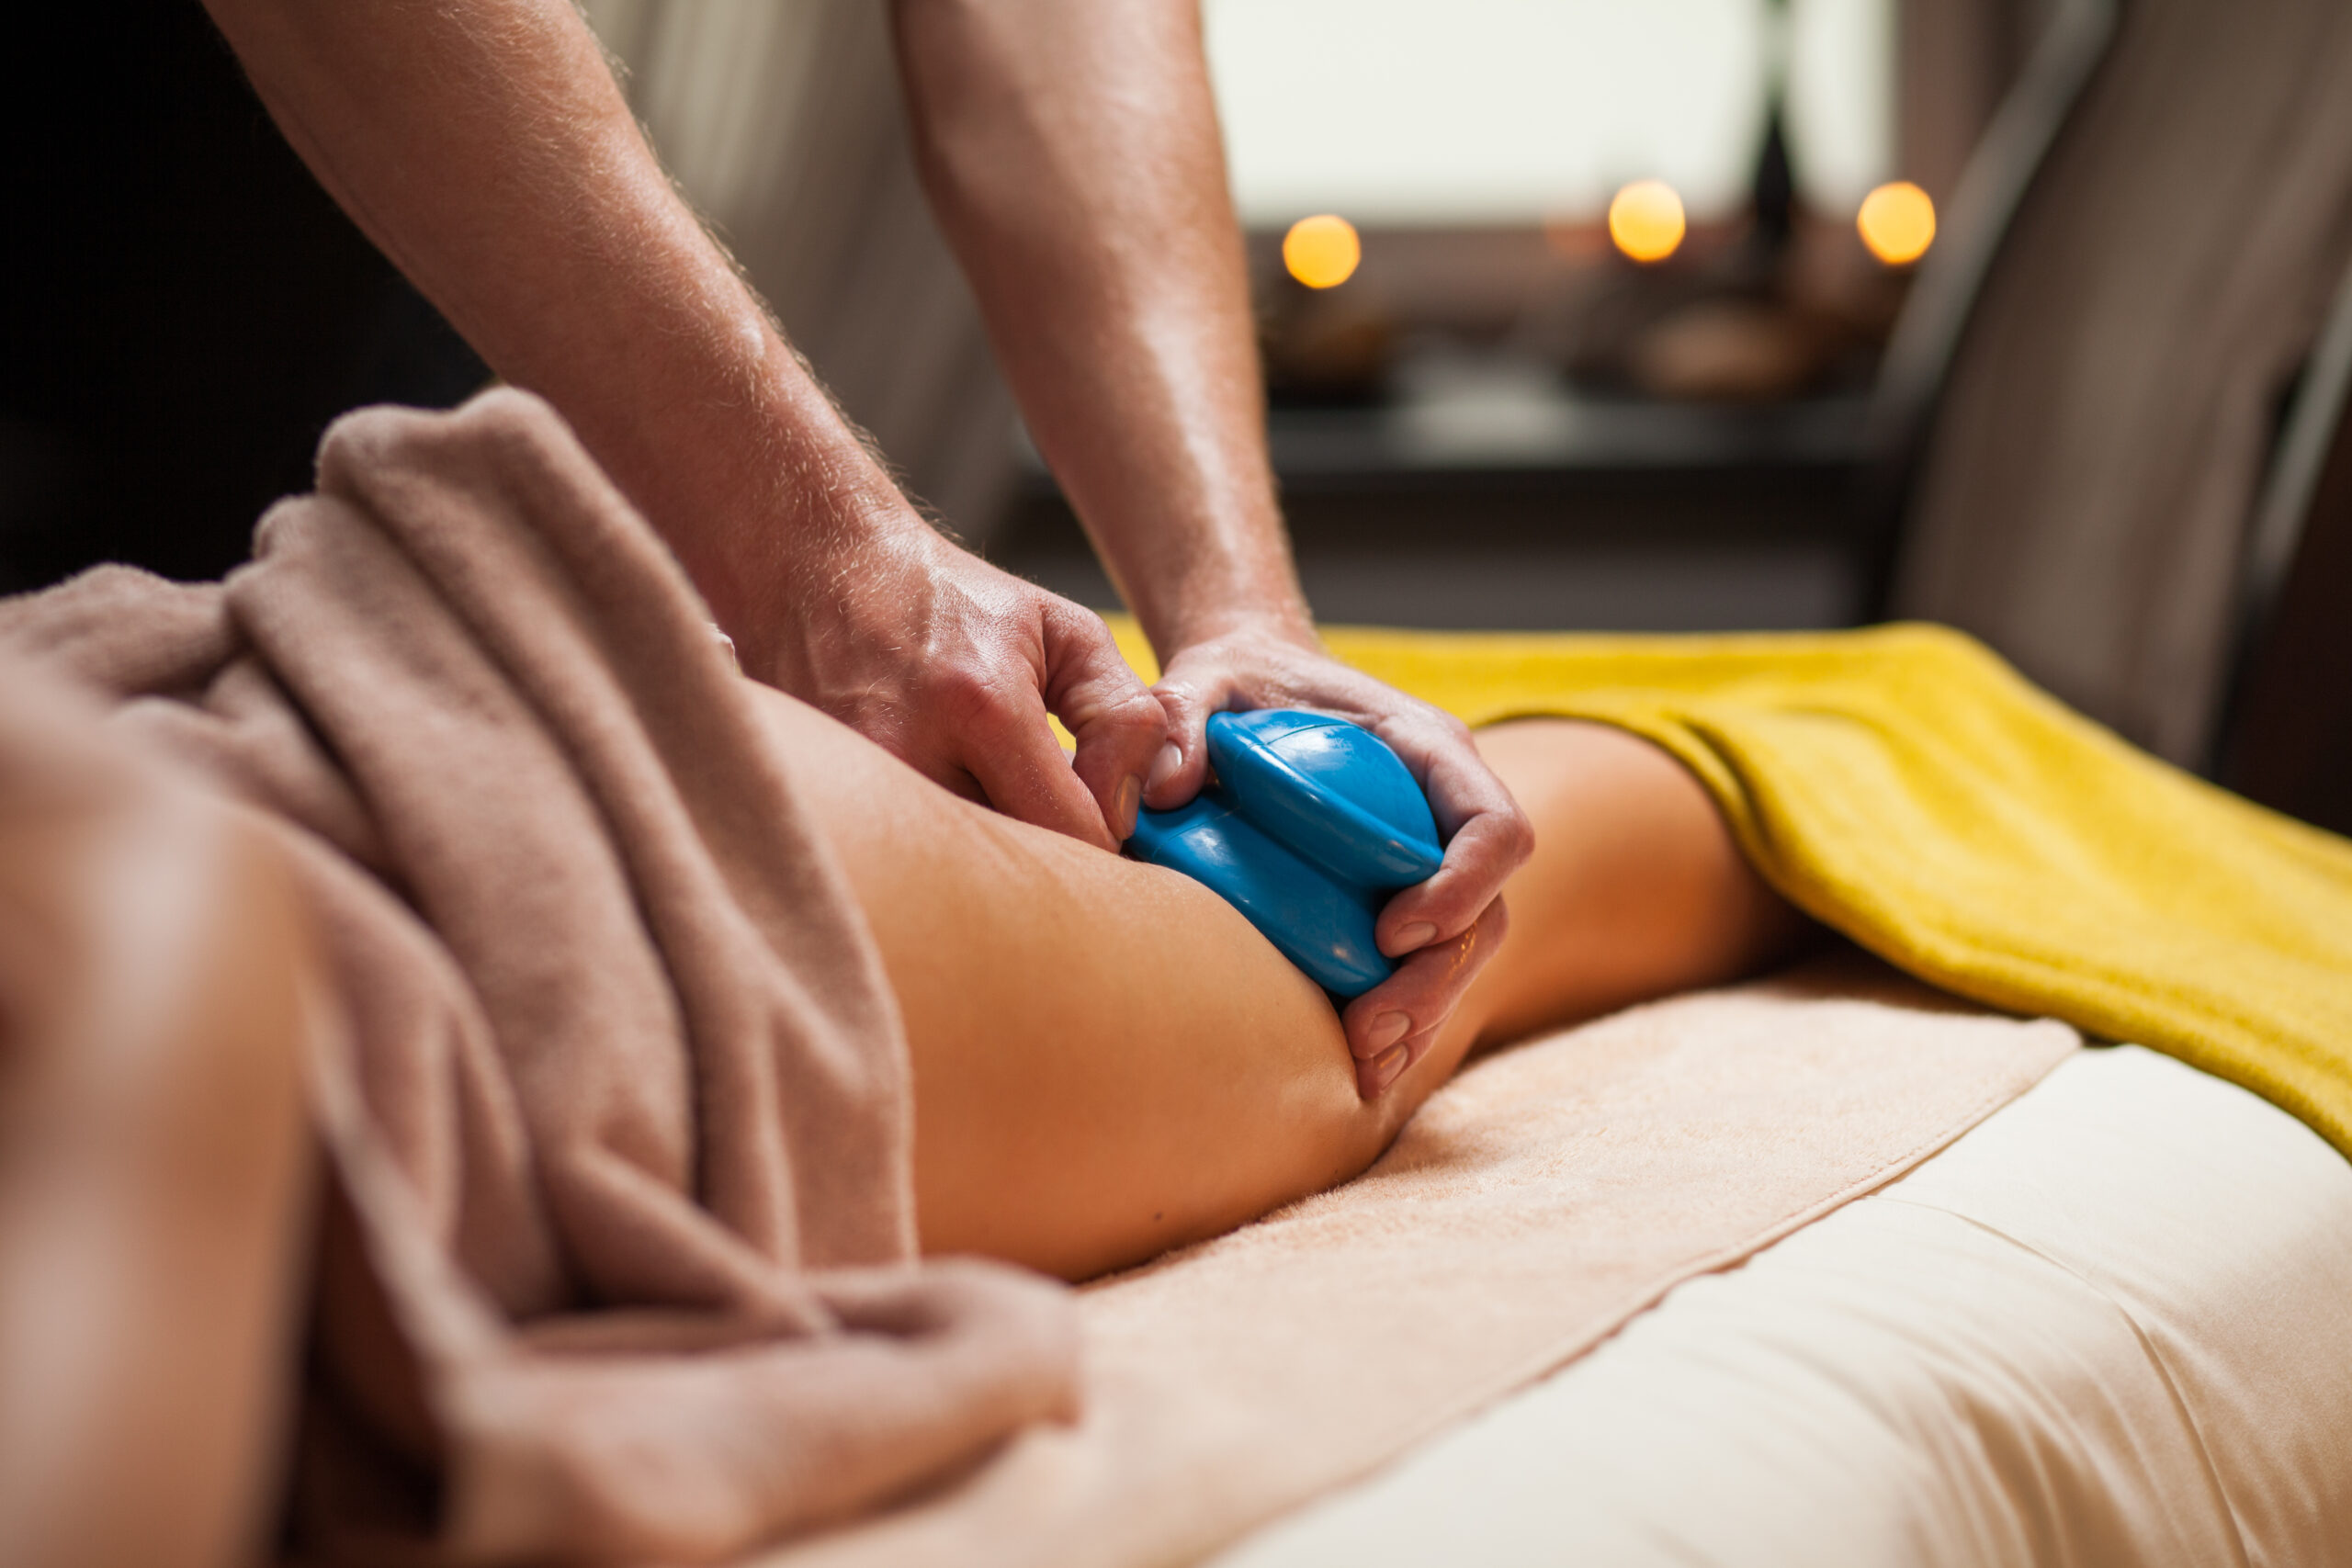 What Is Sports Massage: Better Than Normal Massage For Pain?